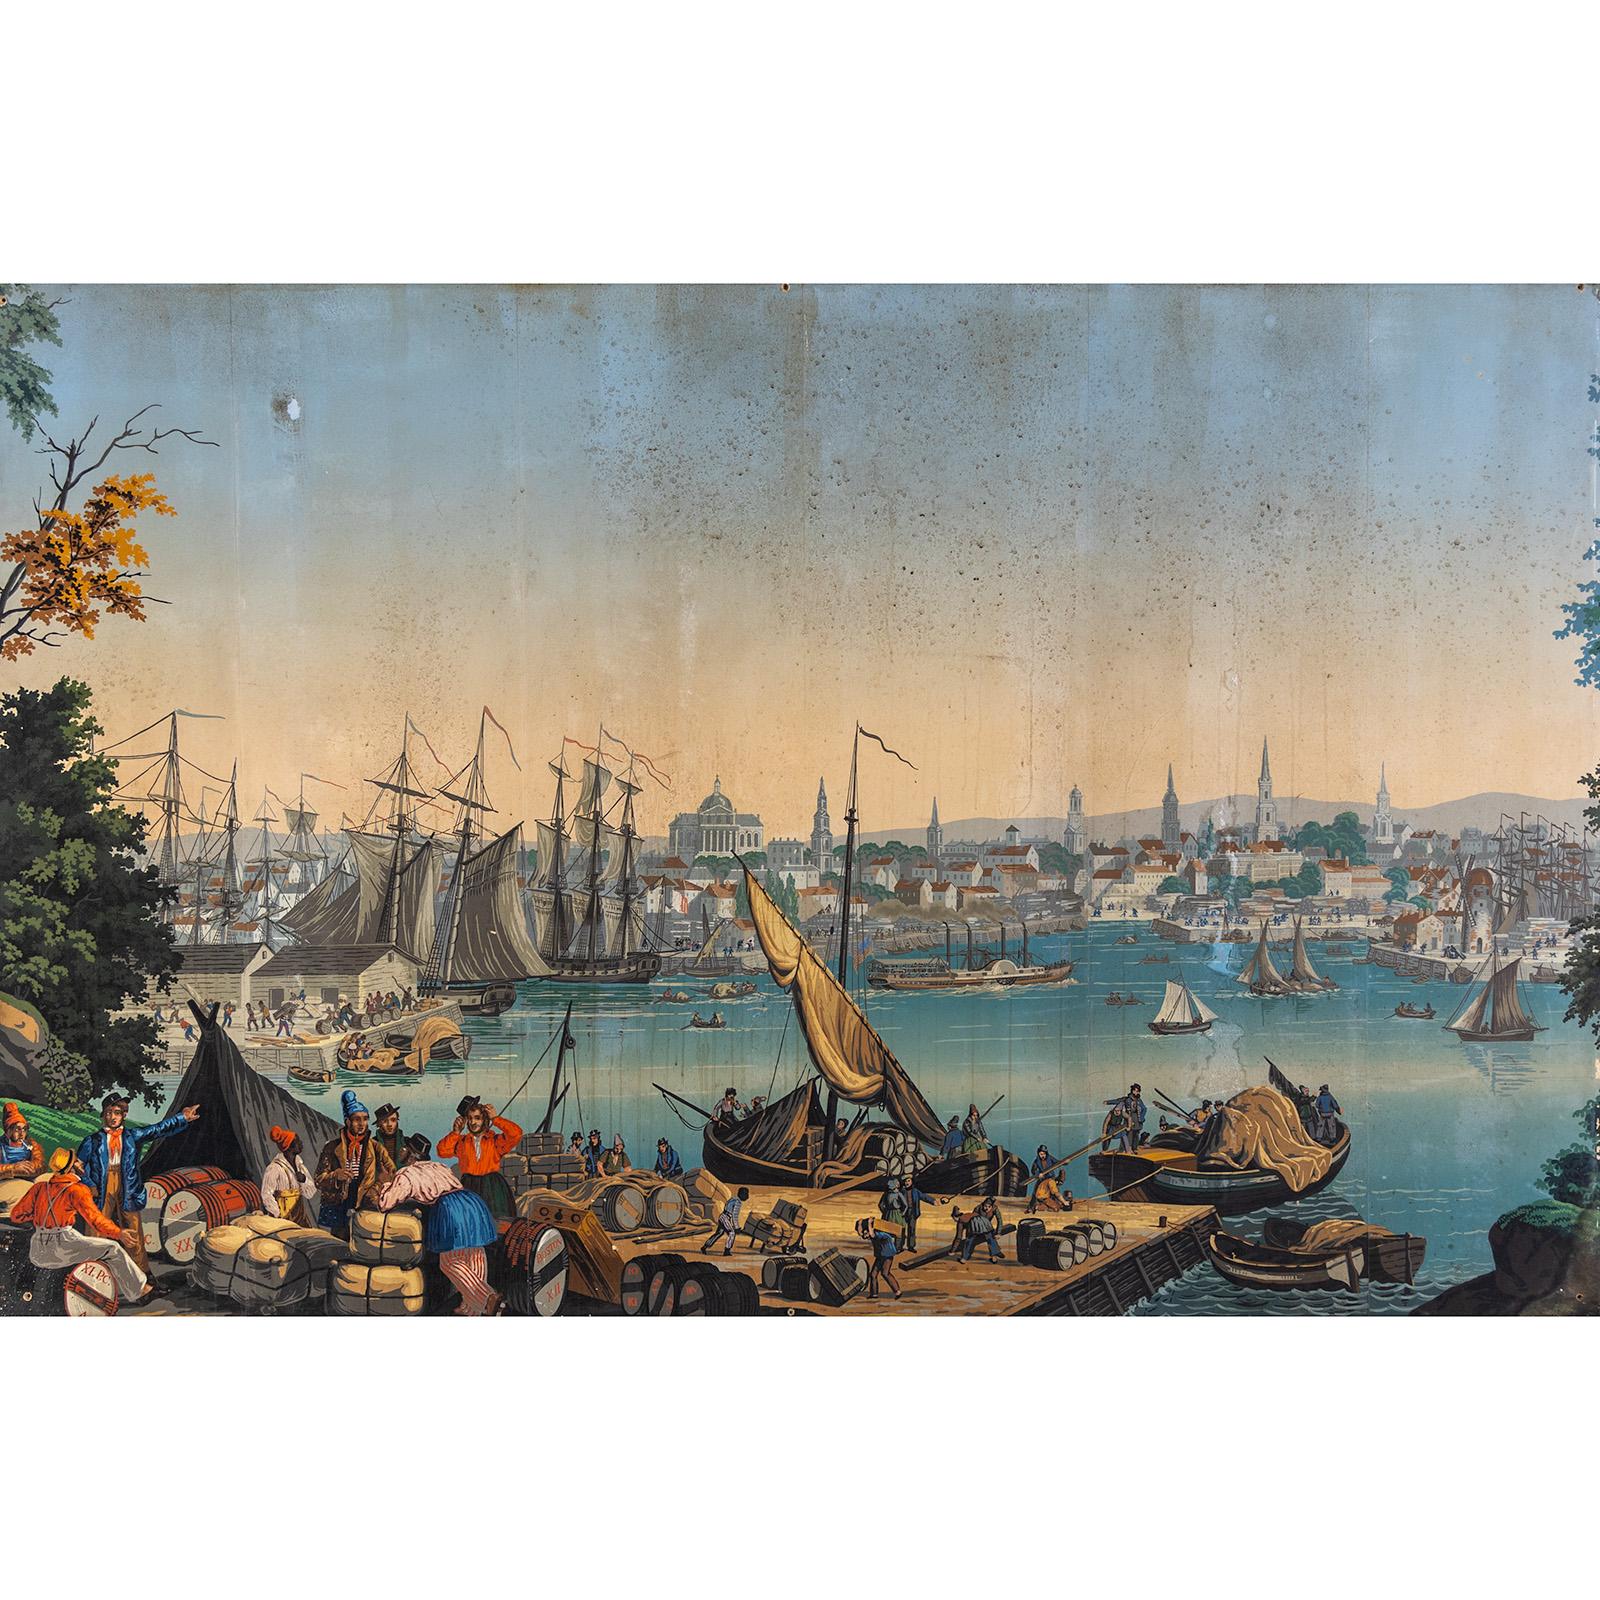 Large block-printed wallpaper with an idyllic, idealistic harbor scene of Boston. The motif comes from the 